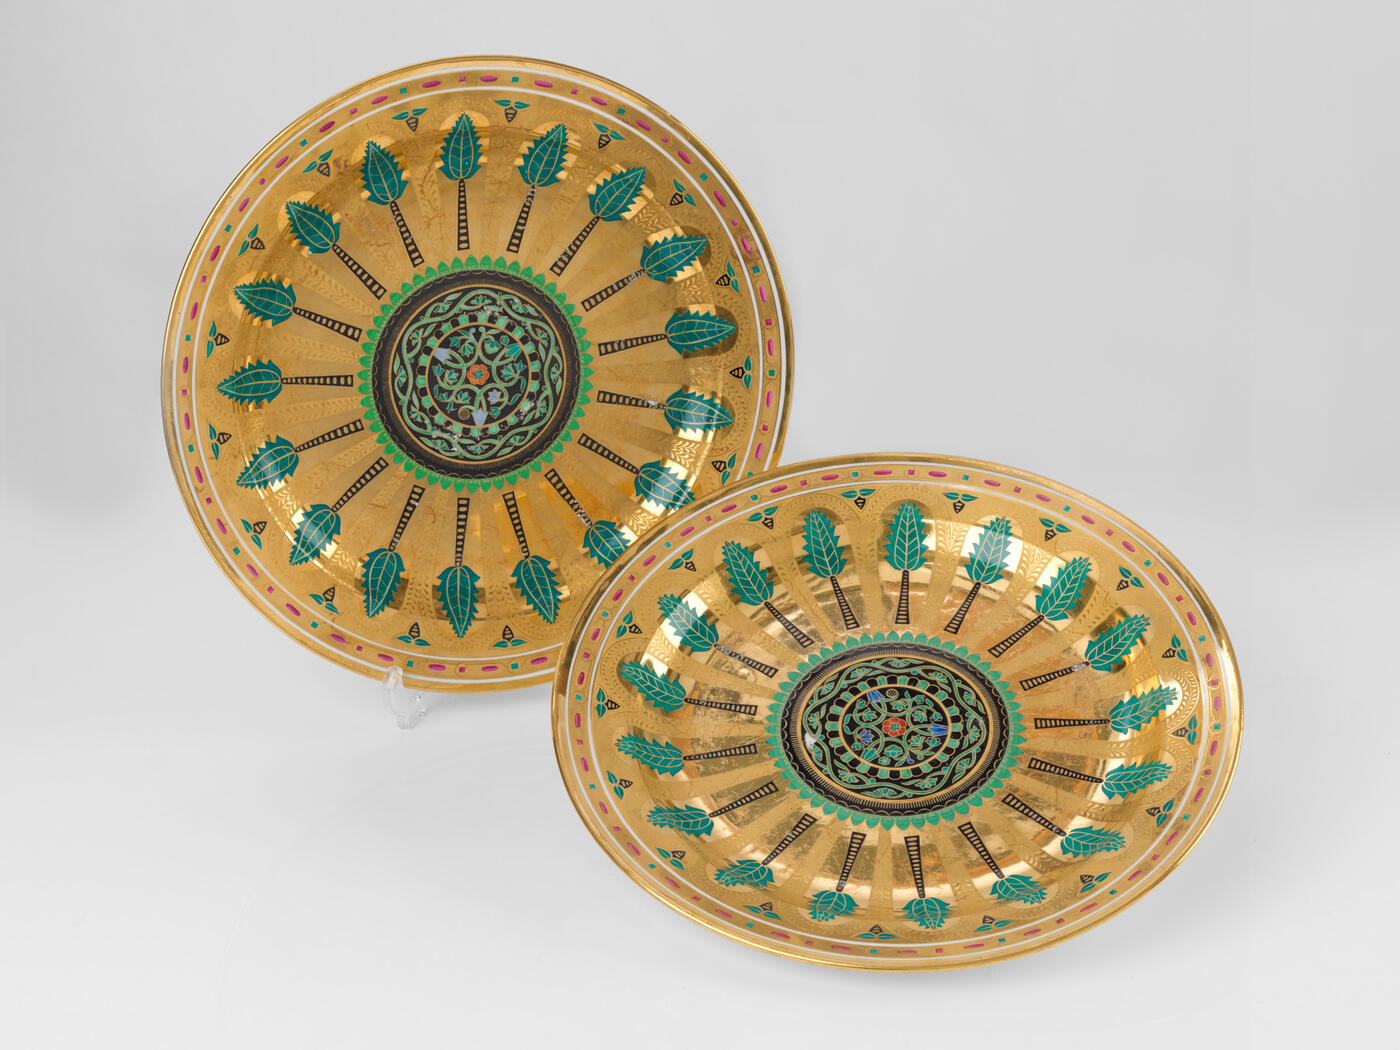 A Pair of Large Porcelain Serving Dishes from the Kremlin Service